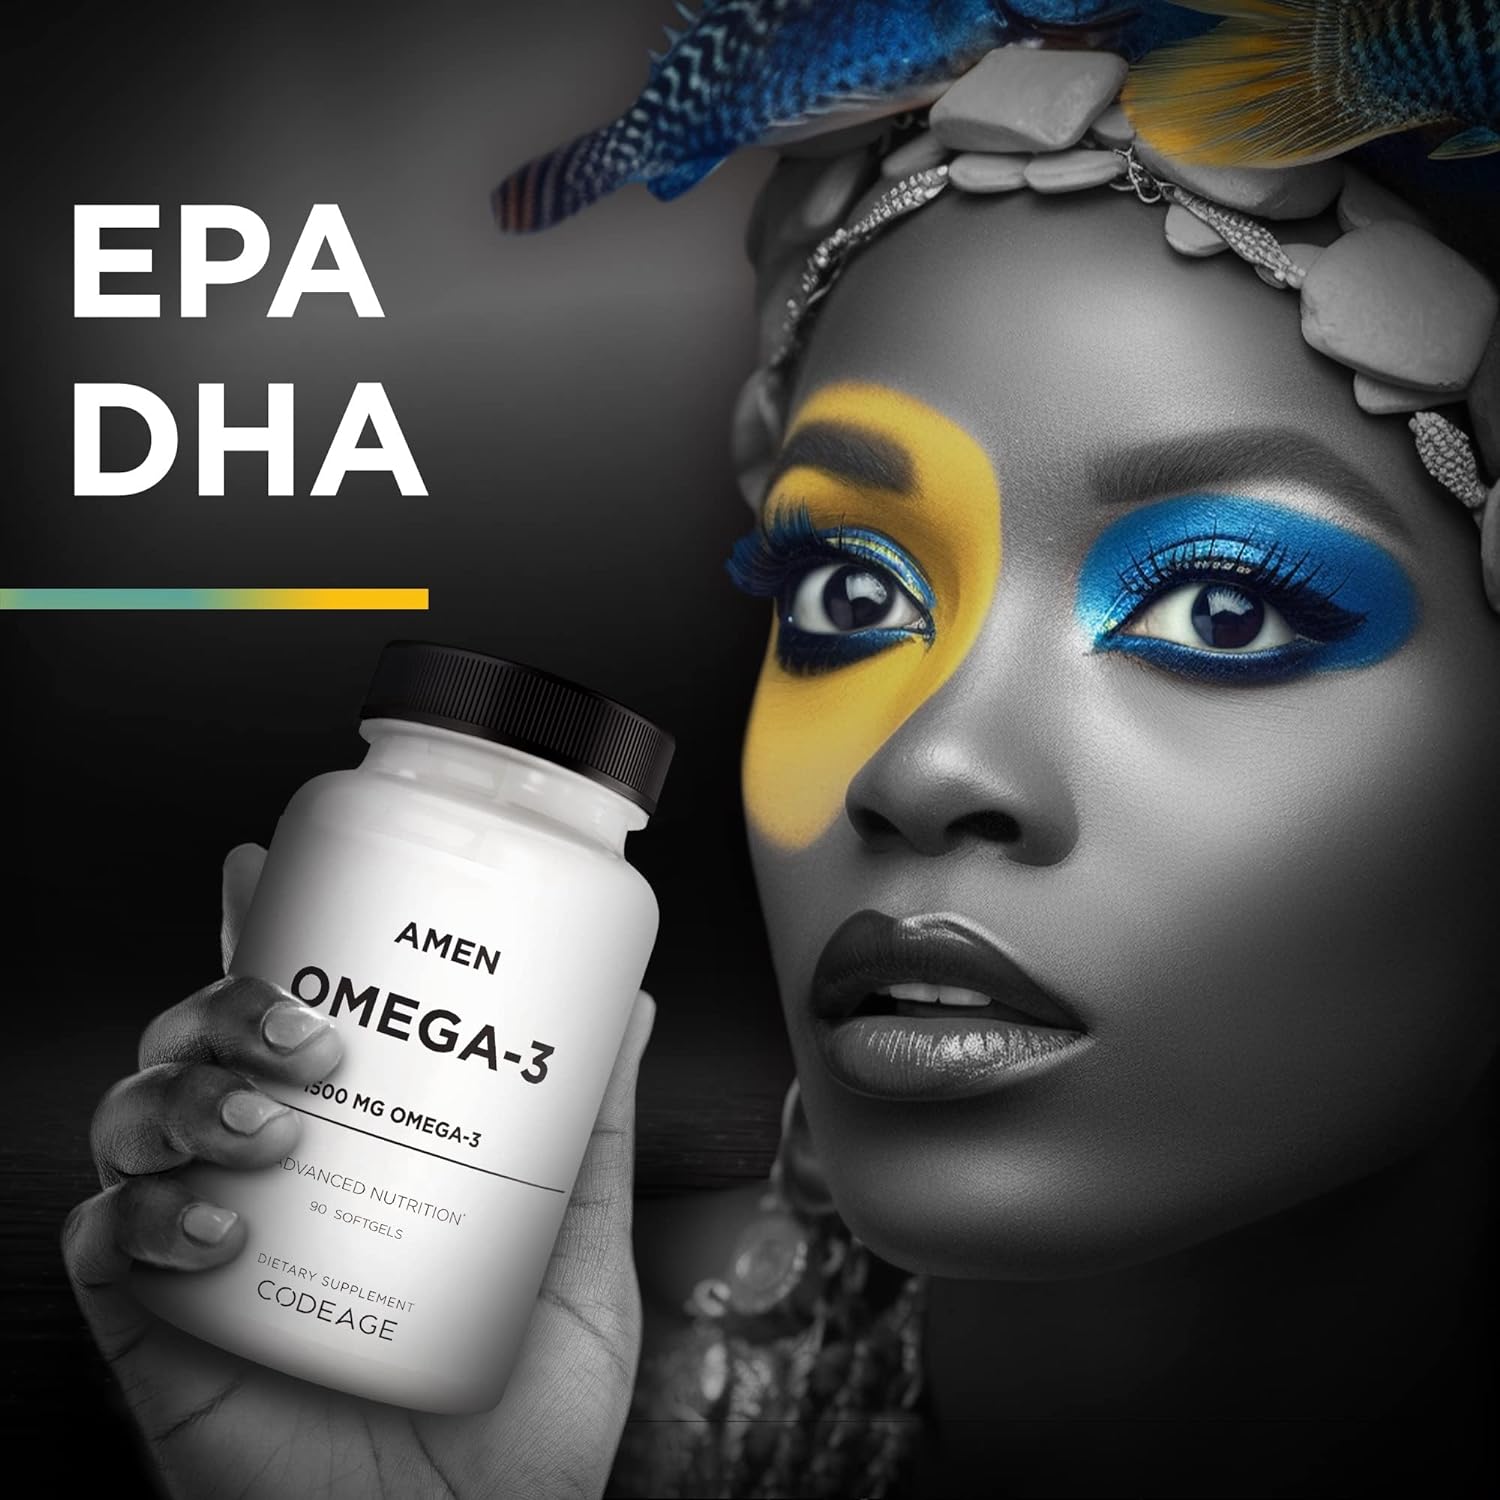 Amen Omega-3 Supplement - 1500mg High-Potency Daily Omega 3 - EPA and DHA Fatty Acids Fish Oil - 45-Day Supply - Heart Health, Immune, Brain, Cognition, Memory Support Vitamins - 90 Soft Gels Capsules : Health & Household